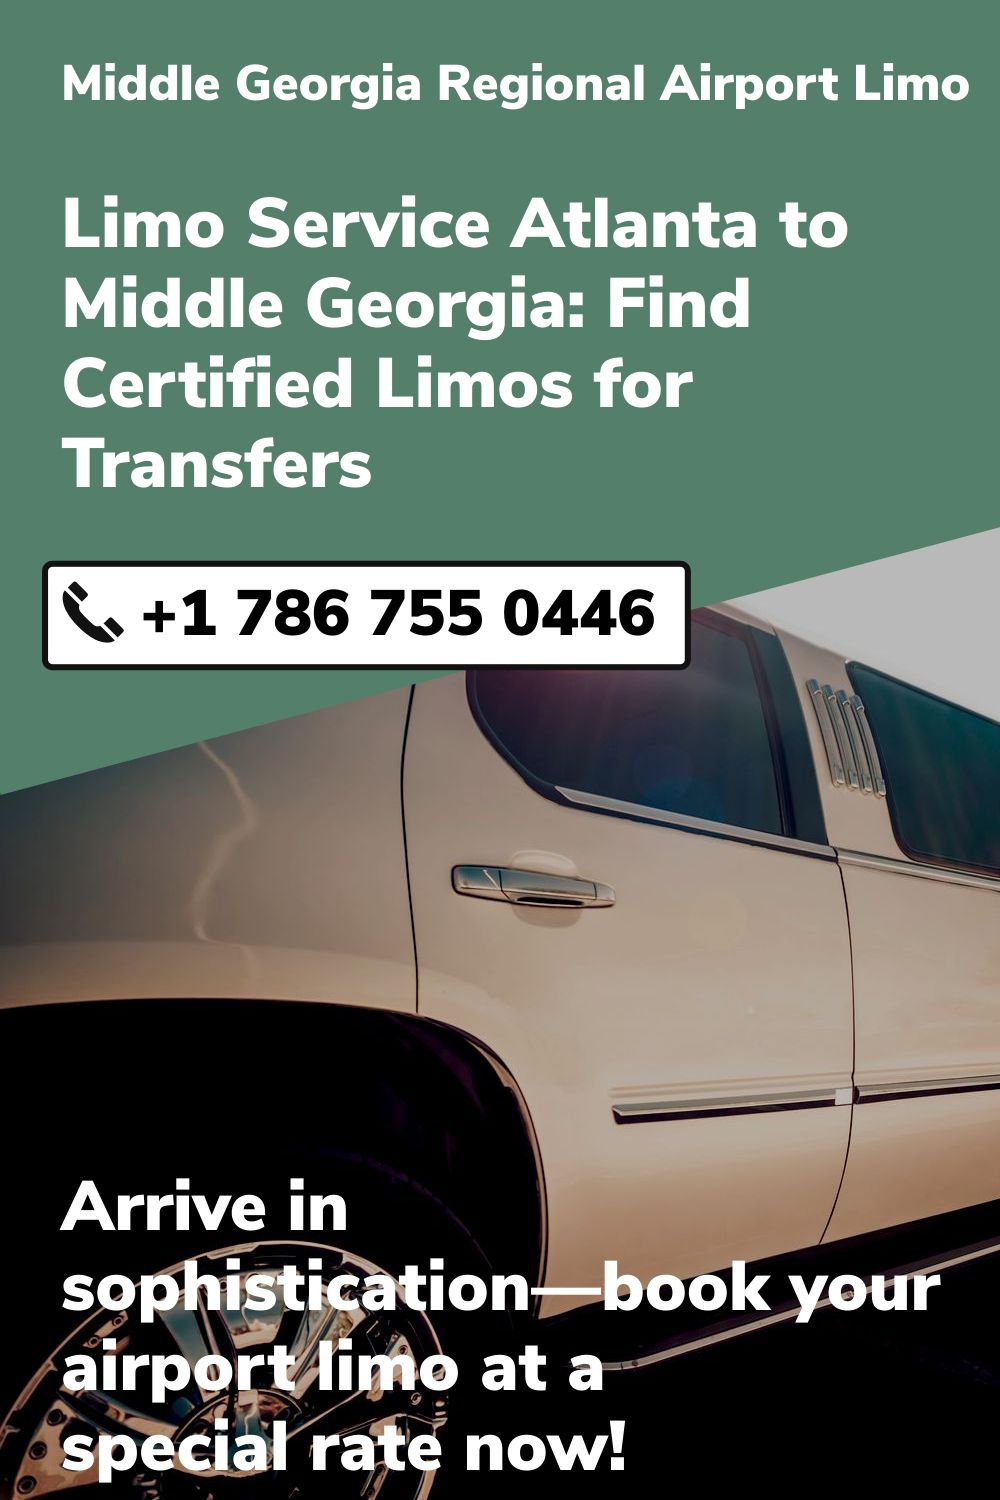 Middle Georgia Regional Airport Limo